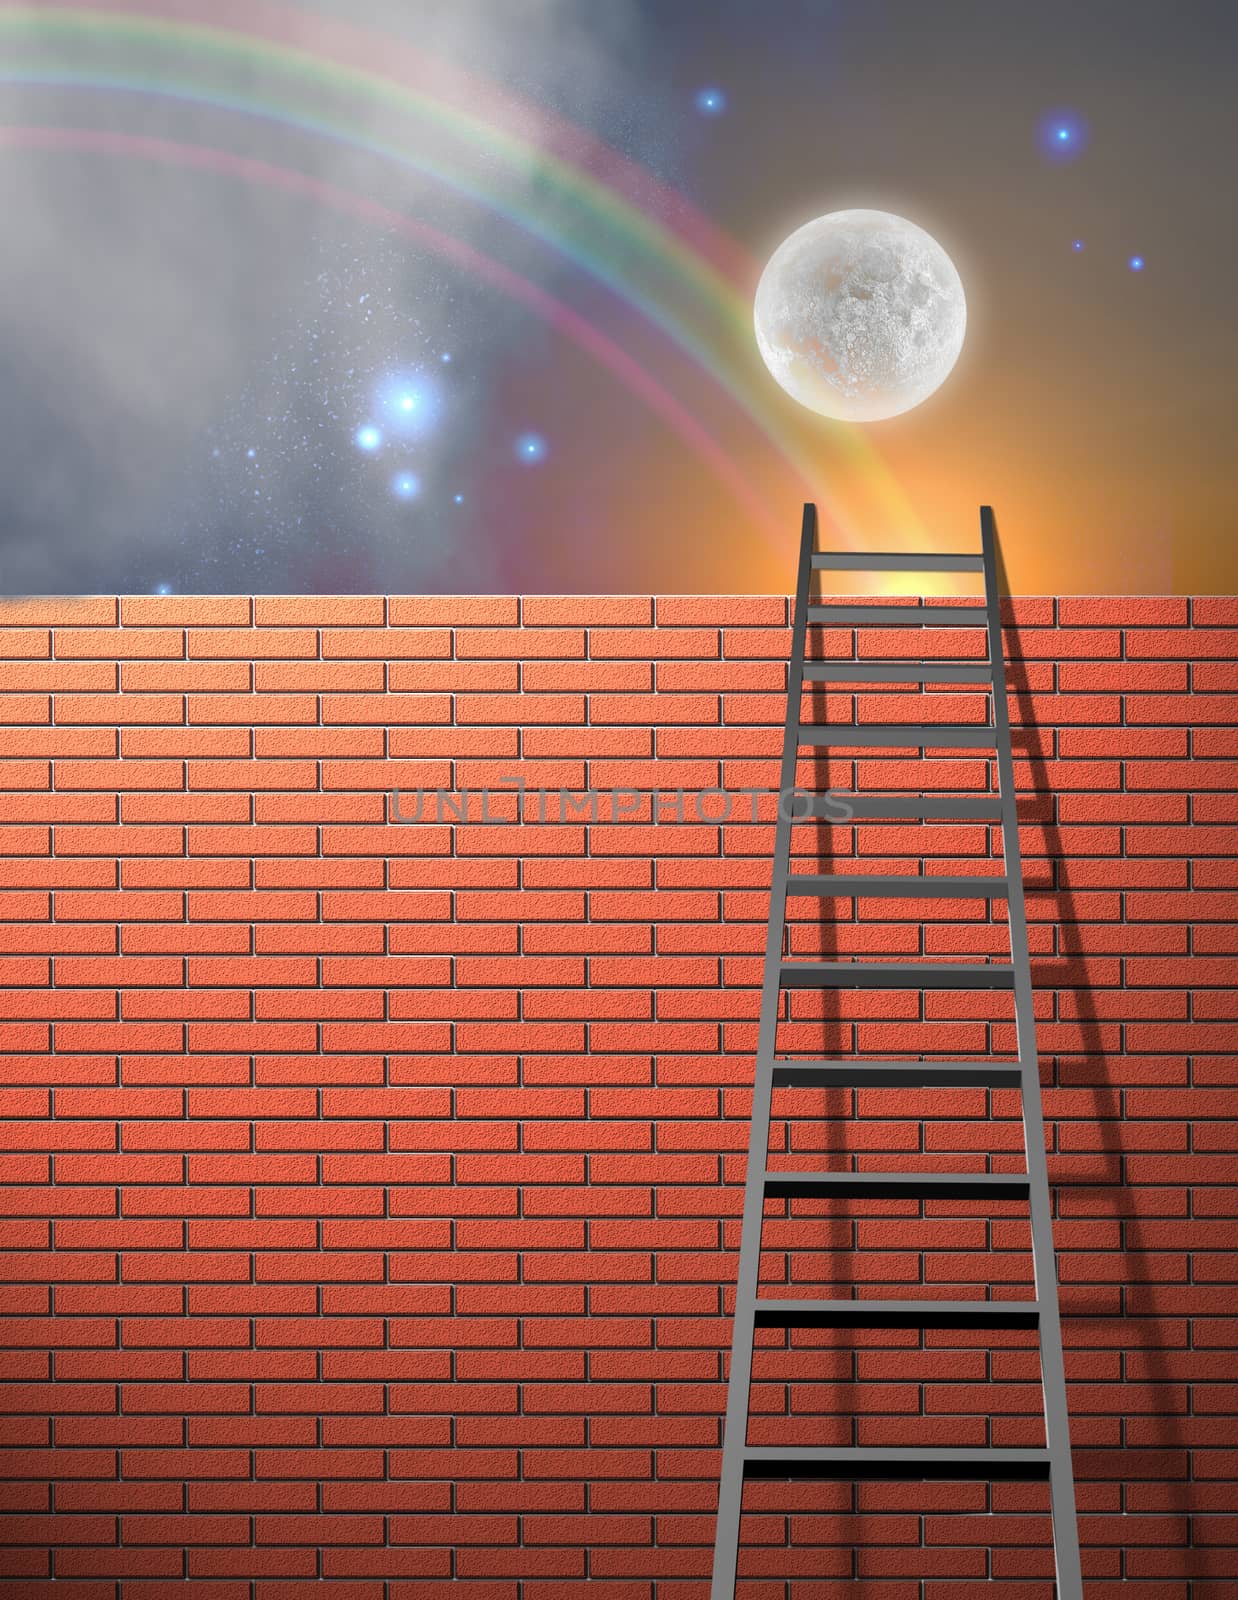 Ladder leans on wall with sky by applesstock